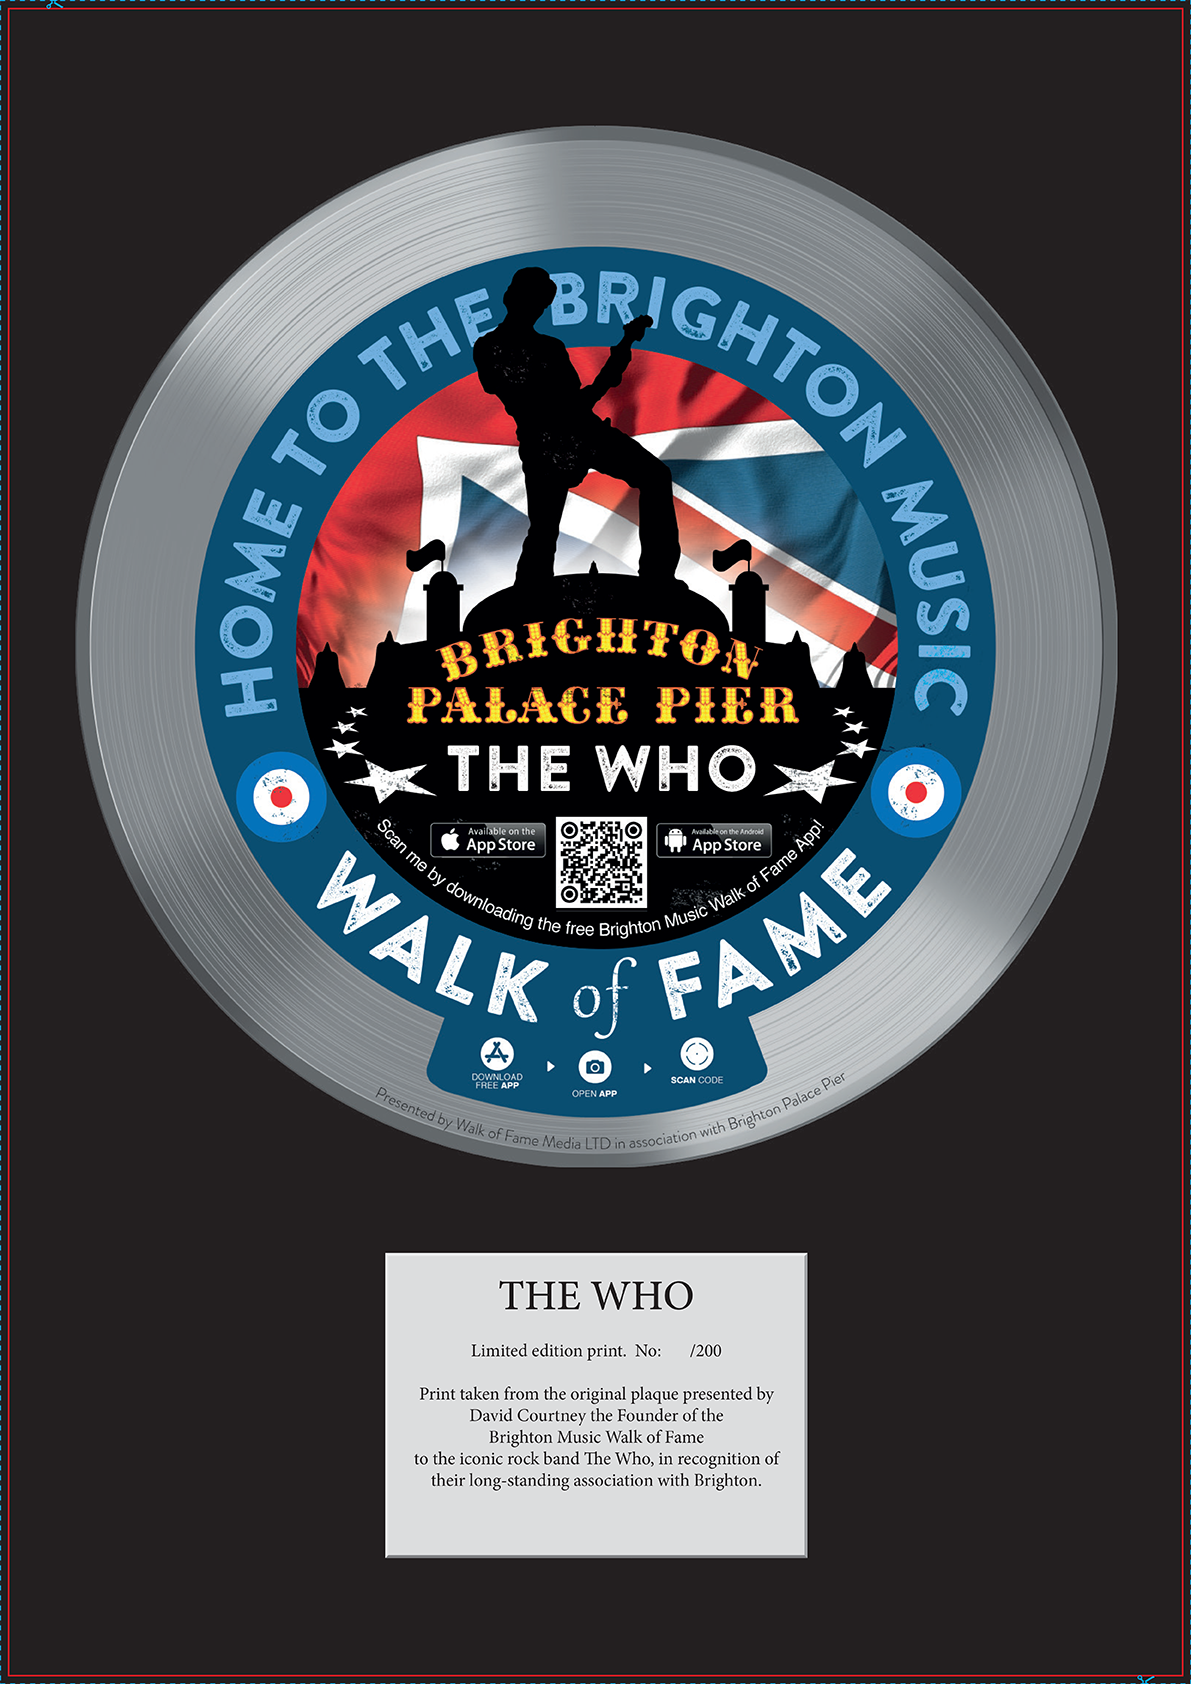 The Who – Interactive Walk of Fame Limited Edition print